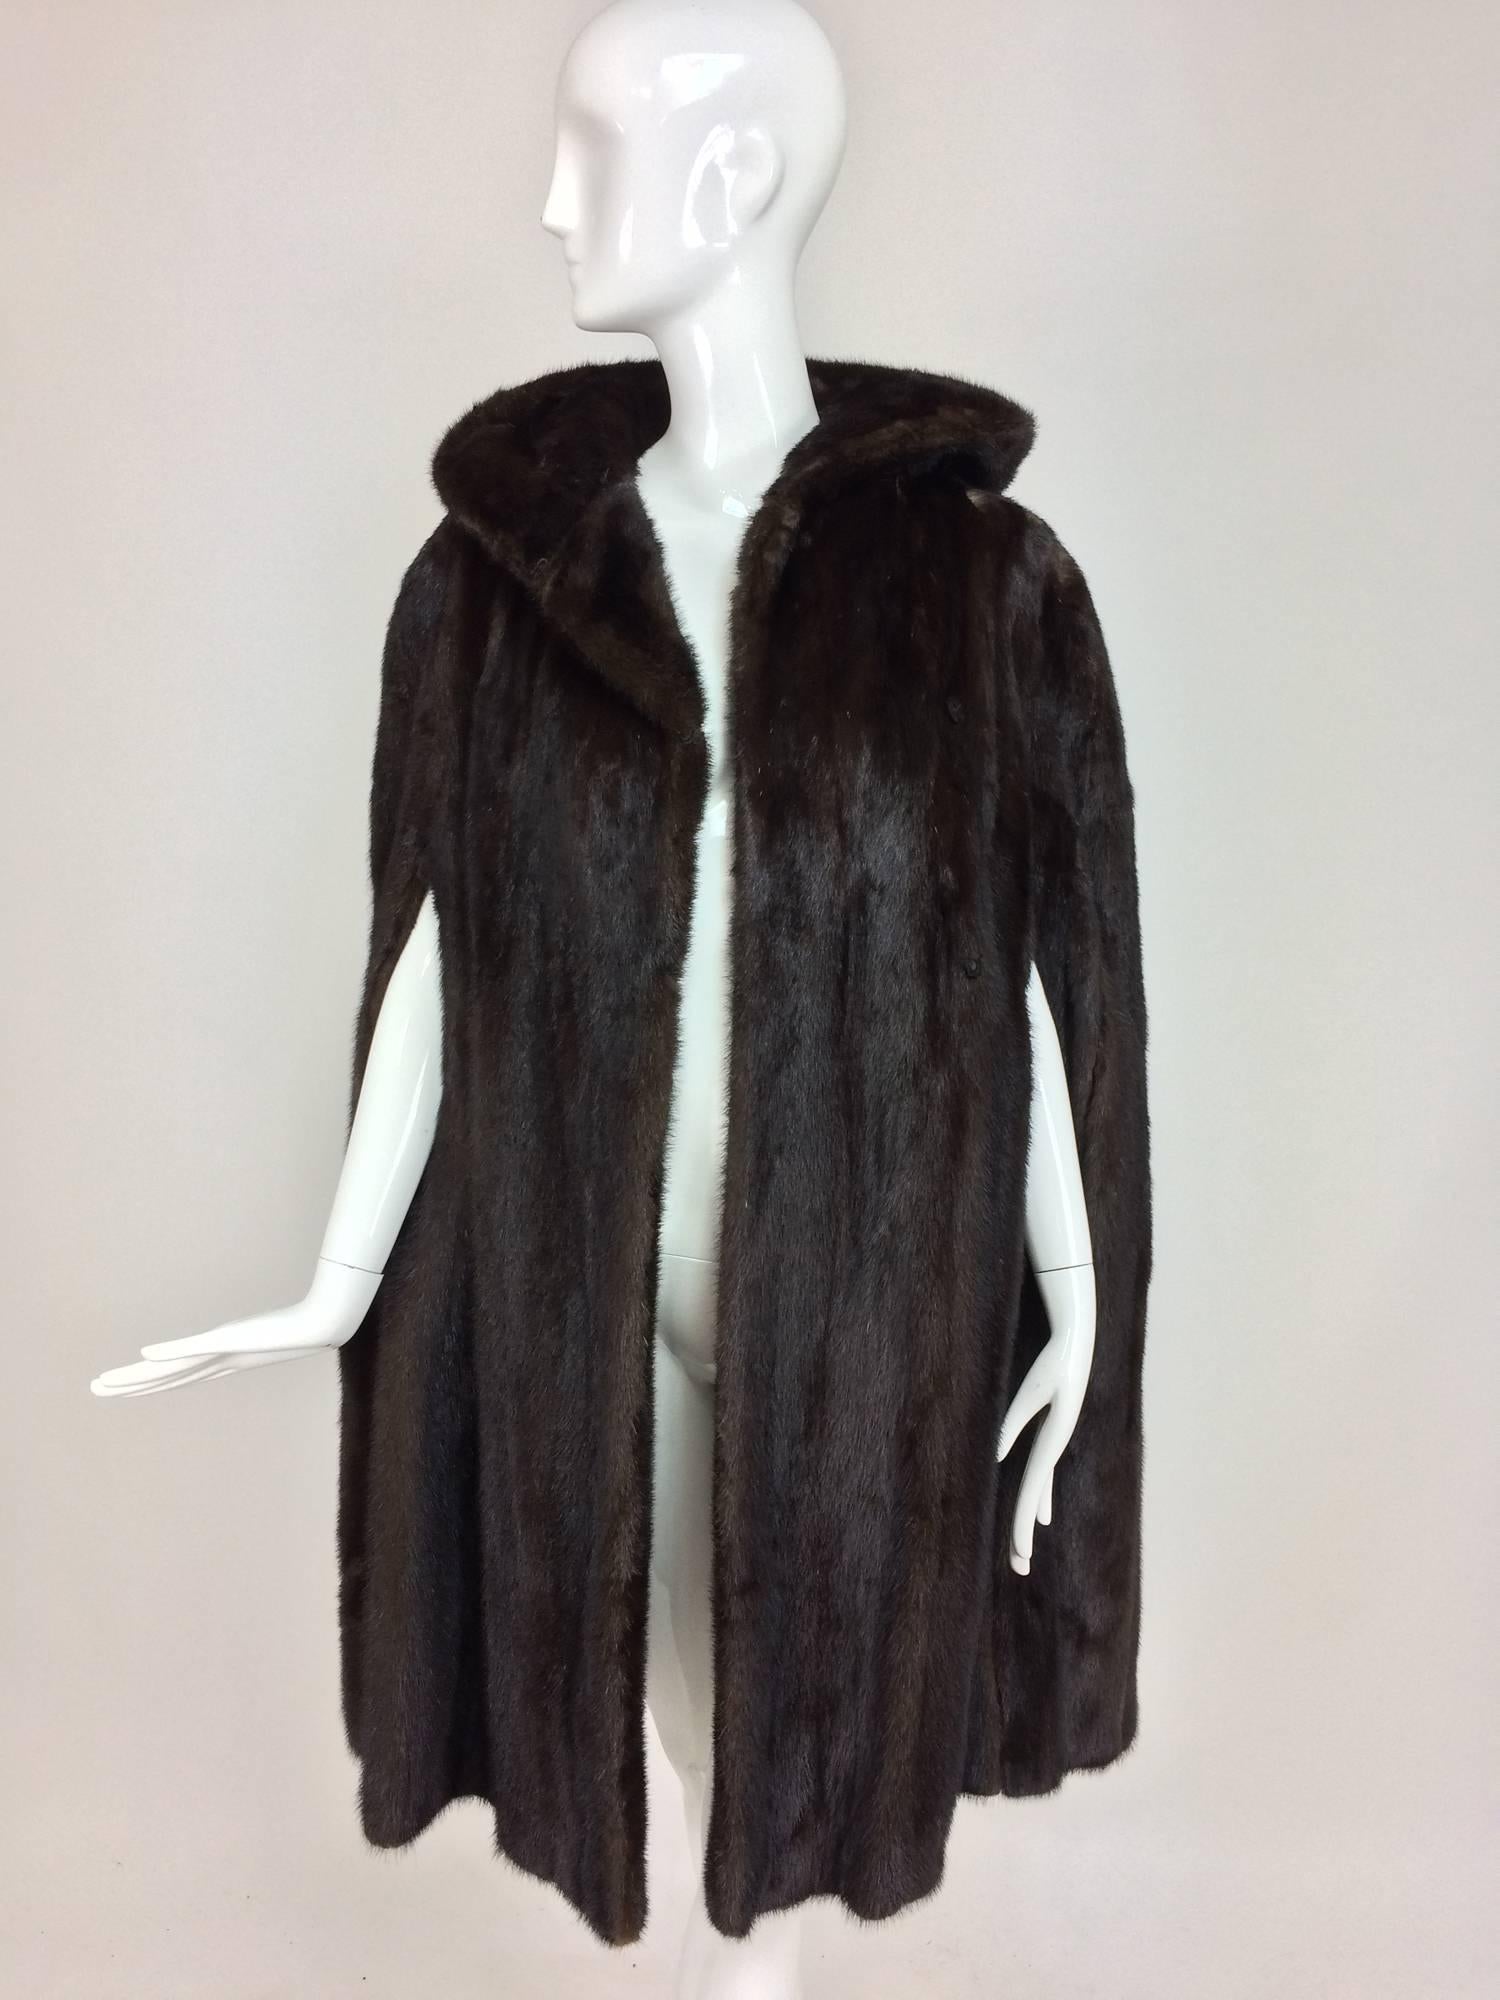 Unique and rare to find! Dark mink fur hooded cape from the 1960s and in excellent condition...Perfect length for cocktail dresses or thigh high boots...Dark glossy mink cape has arm openings at the front and closes with hook and eyes...The attached